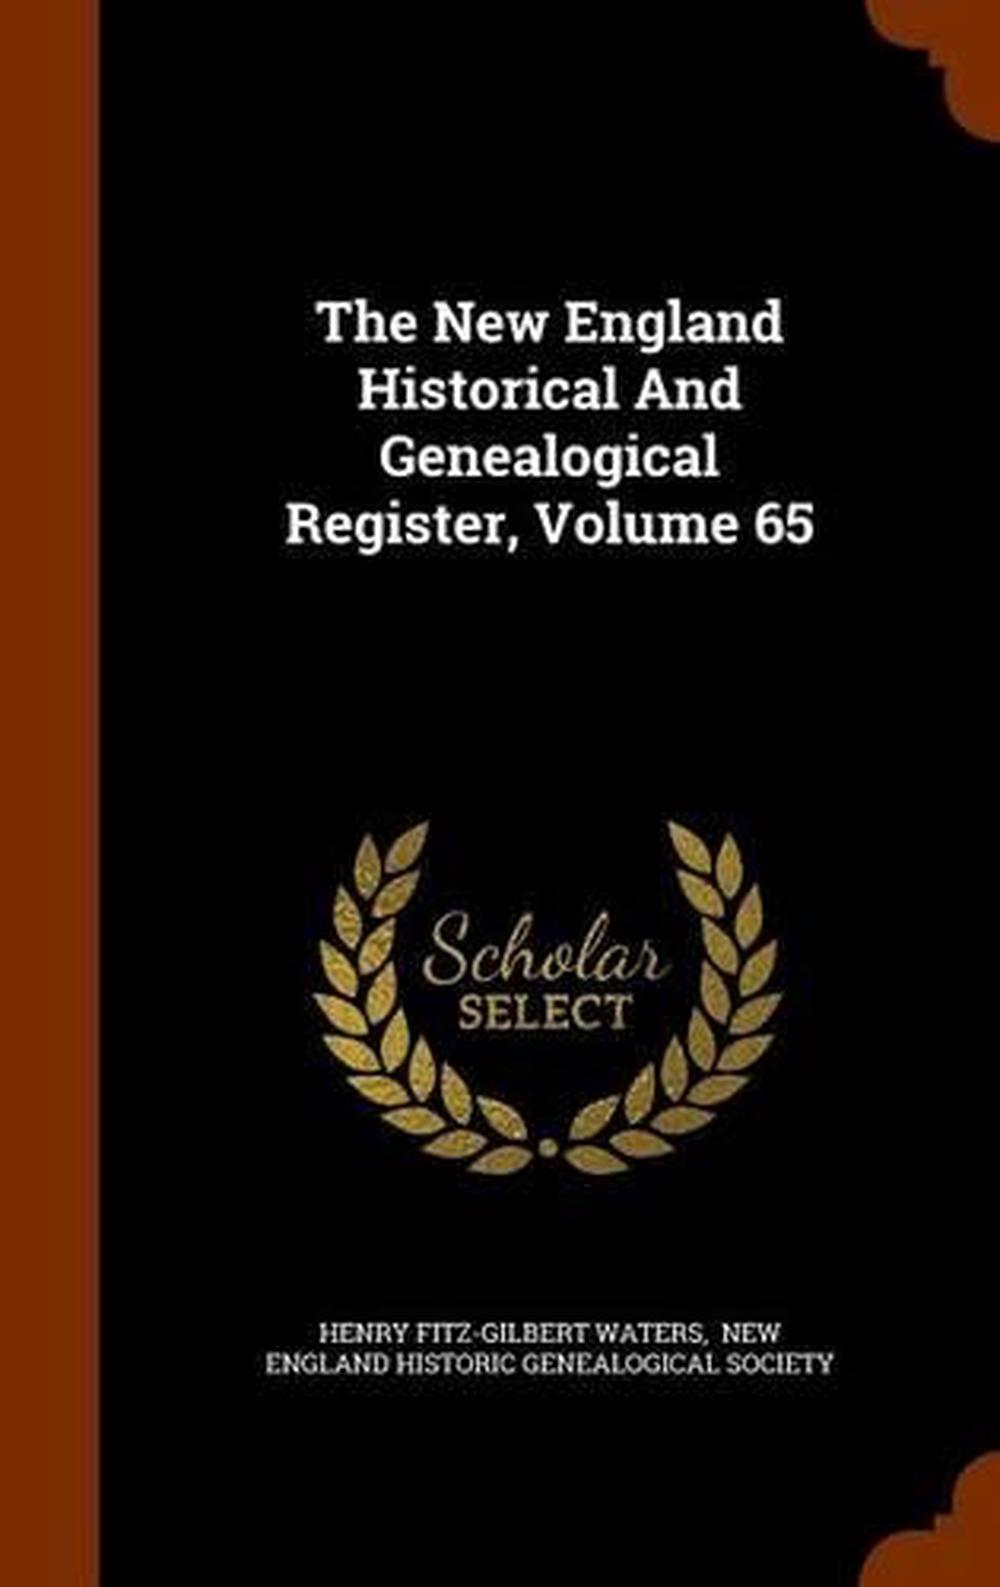 genealogist's handbook for new england research 6th edition